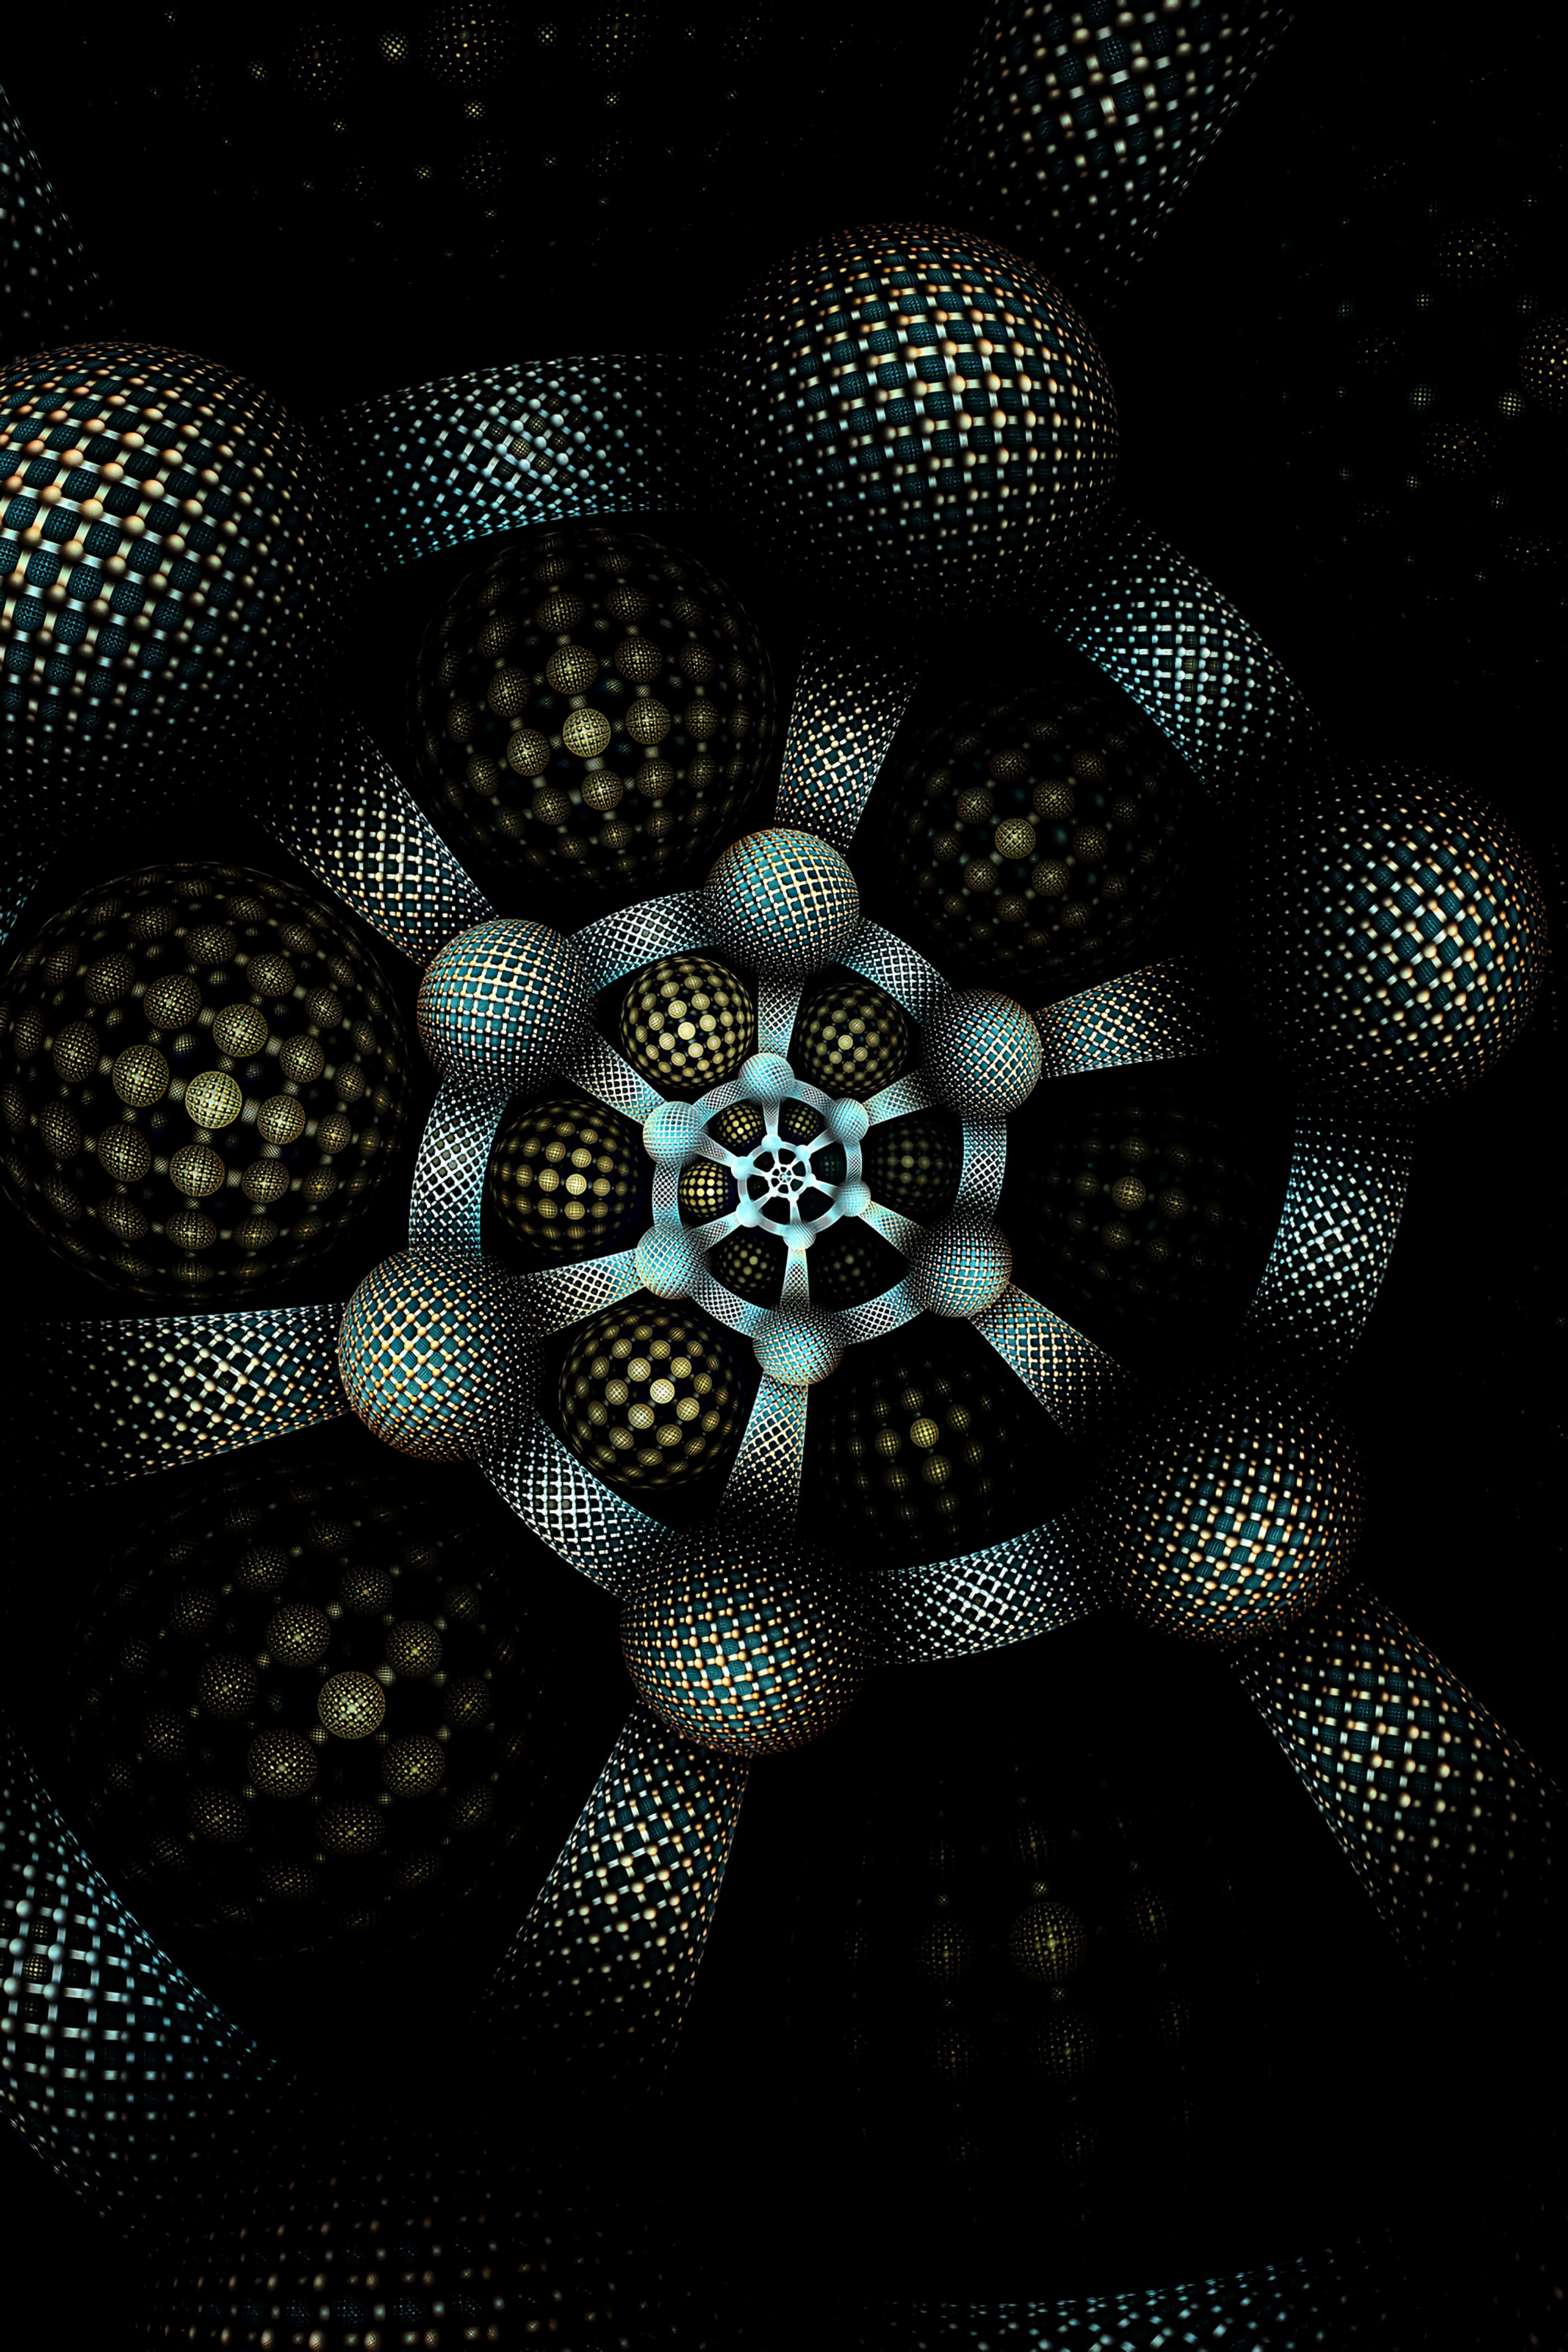 dark, form, circles, involute, abstract, pattern, fractal, swirling phone background